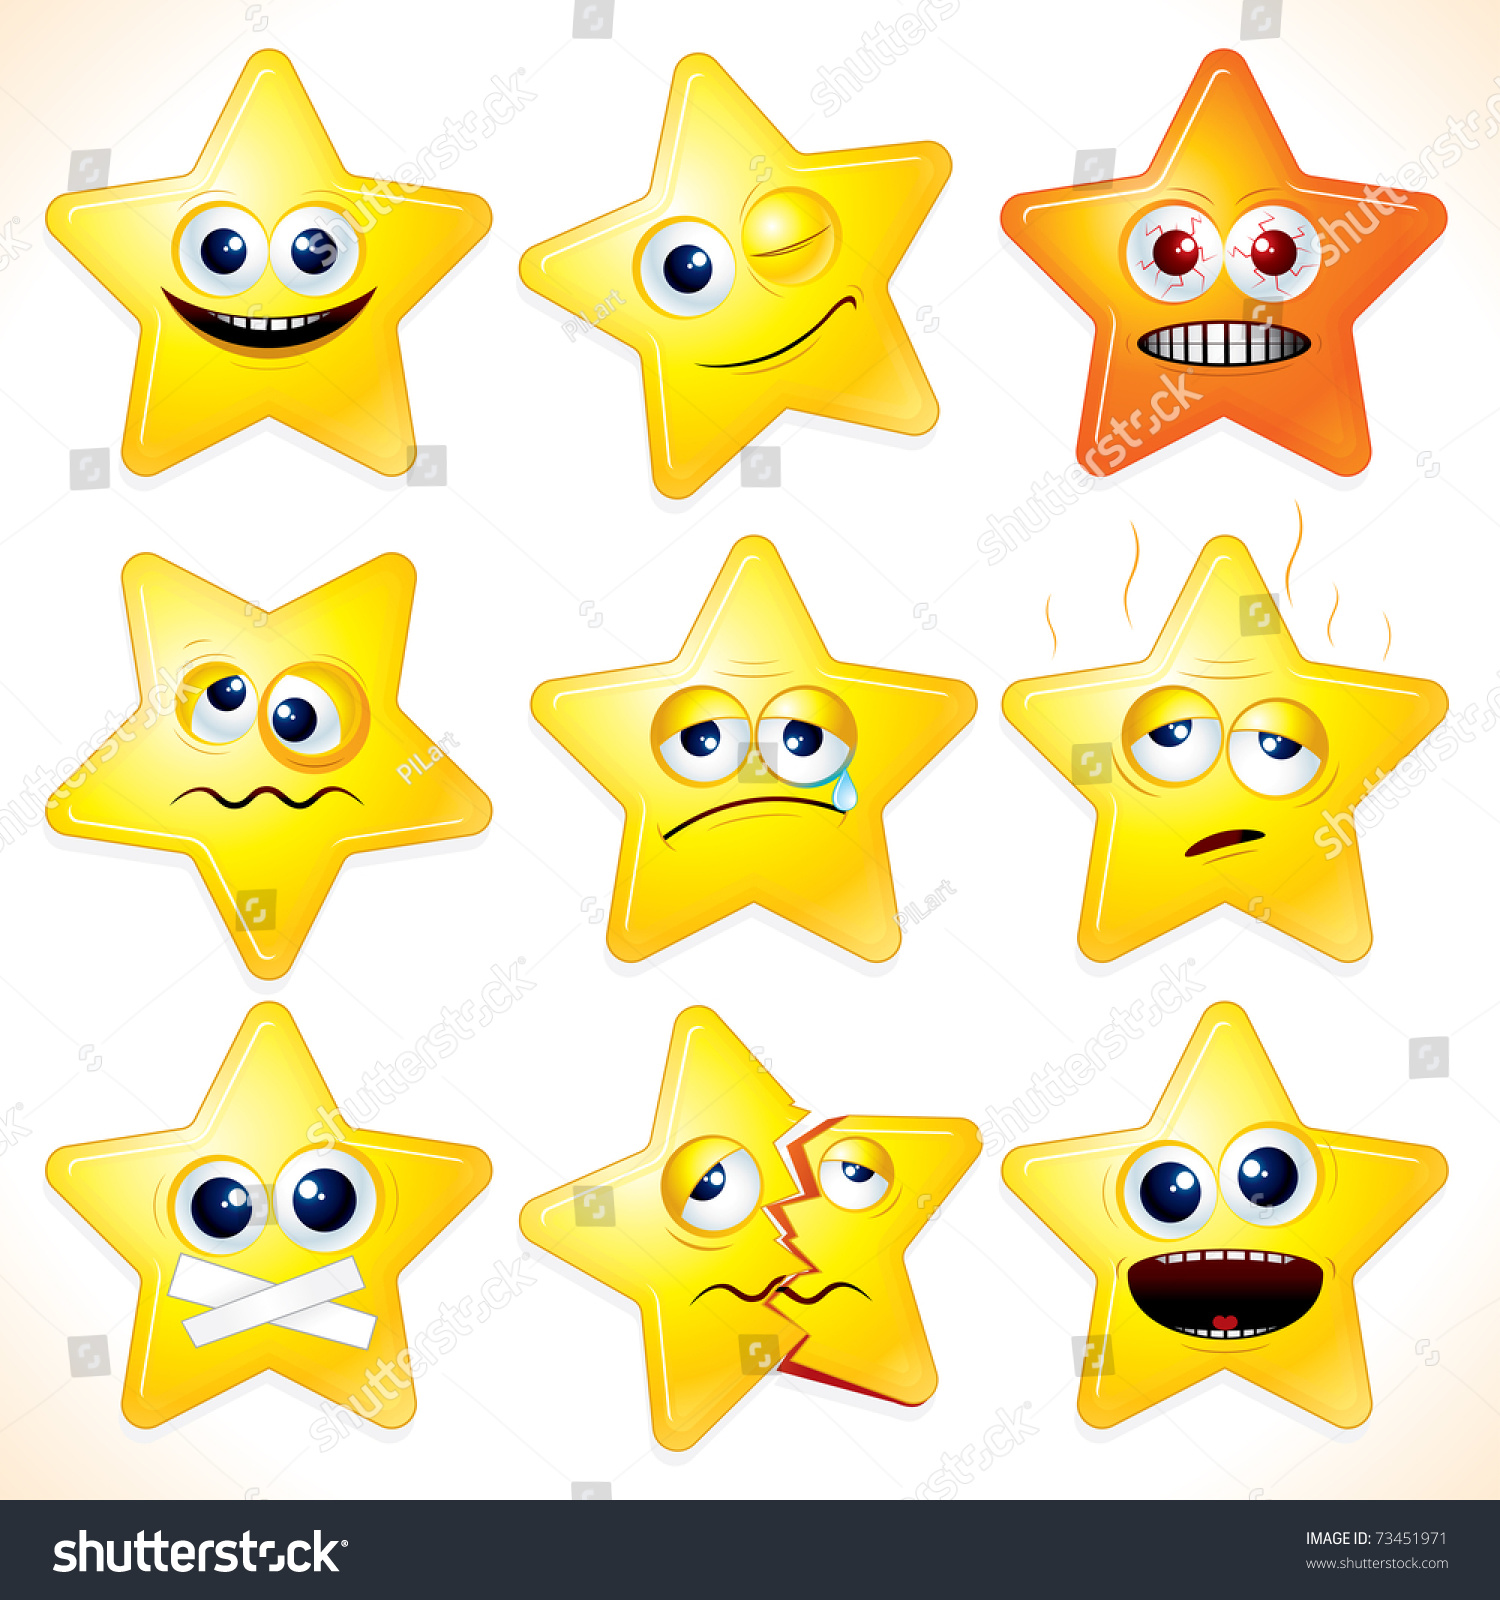 clipart expression emotions - photo #46